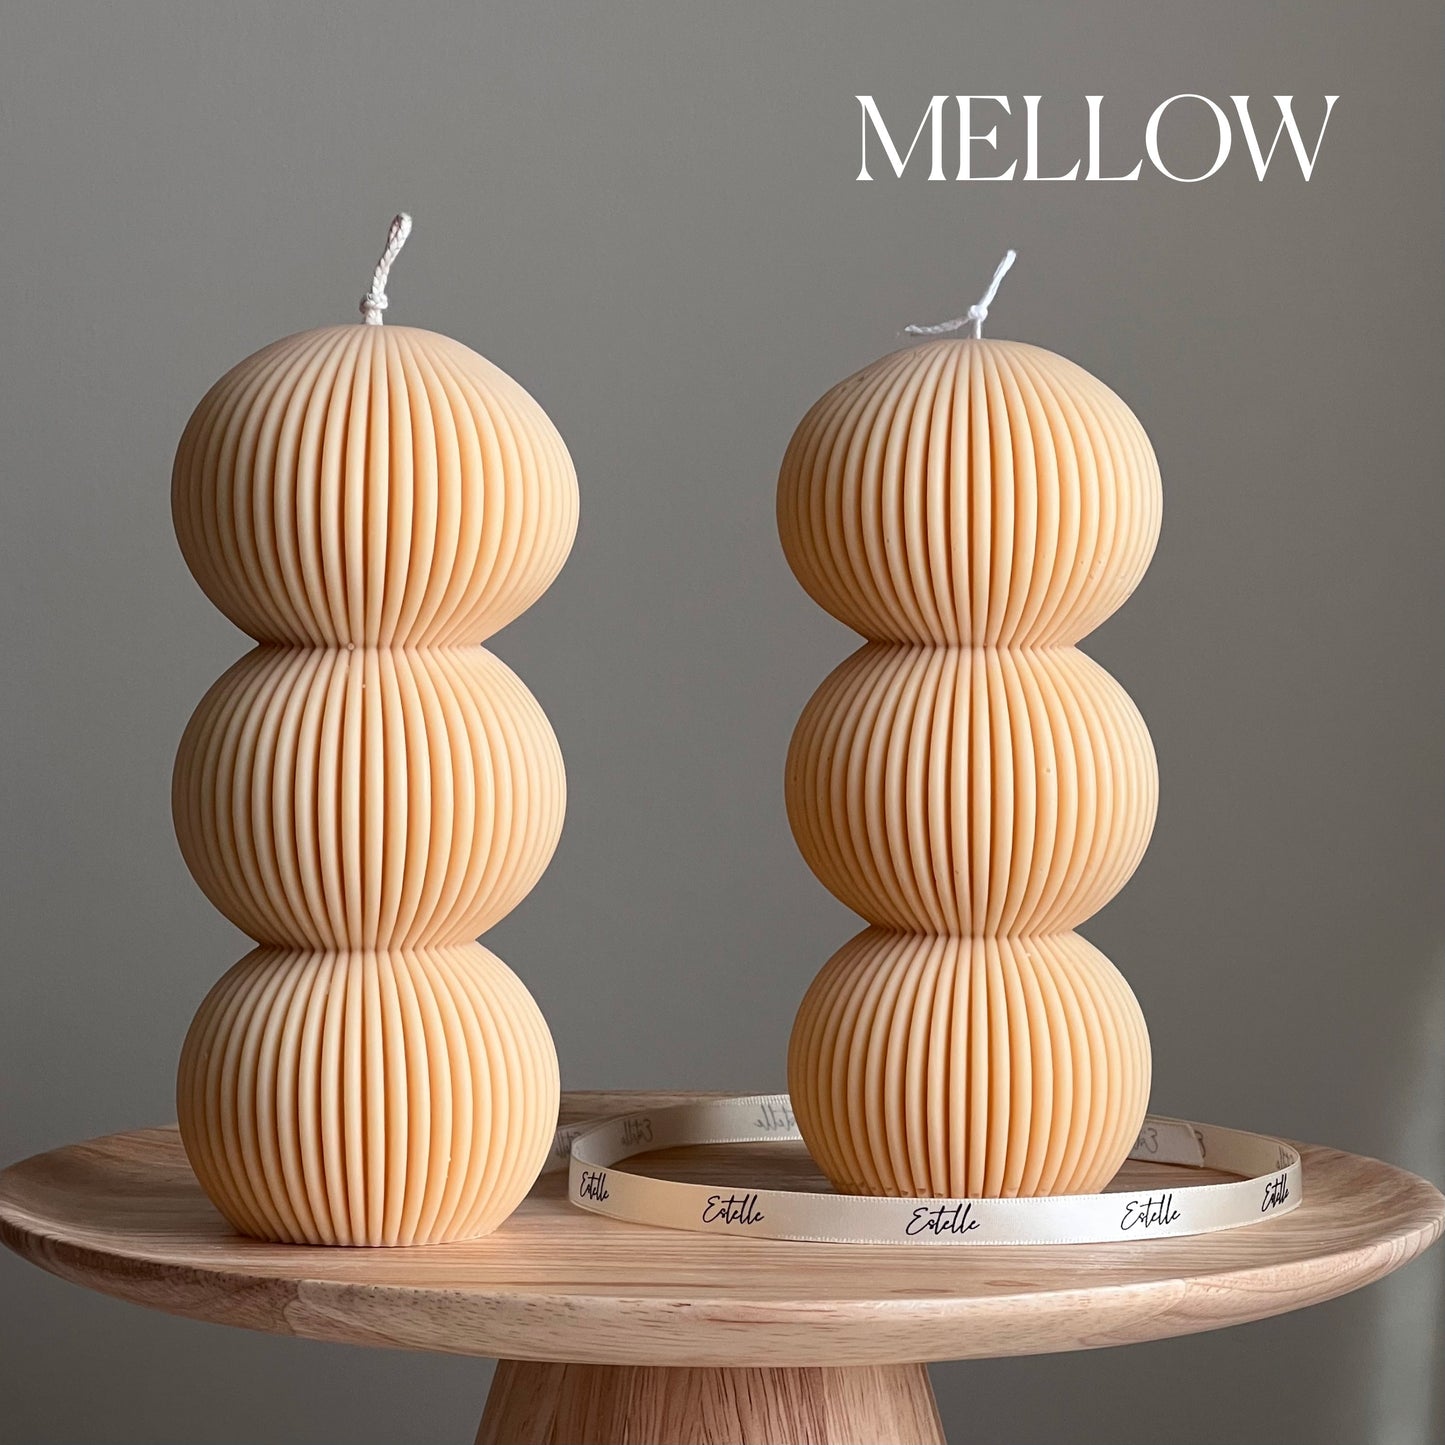 Ribbed Balls Pillar Candle | Soy Wax Candle | Decorative Handmade Candle | Aesthetic Candle| Shaped Candle| Unscented Candles| Unique Candle